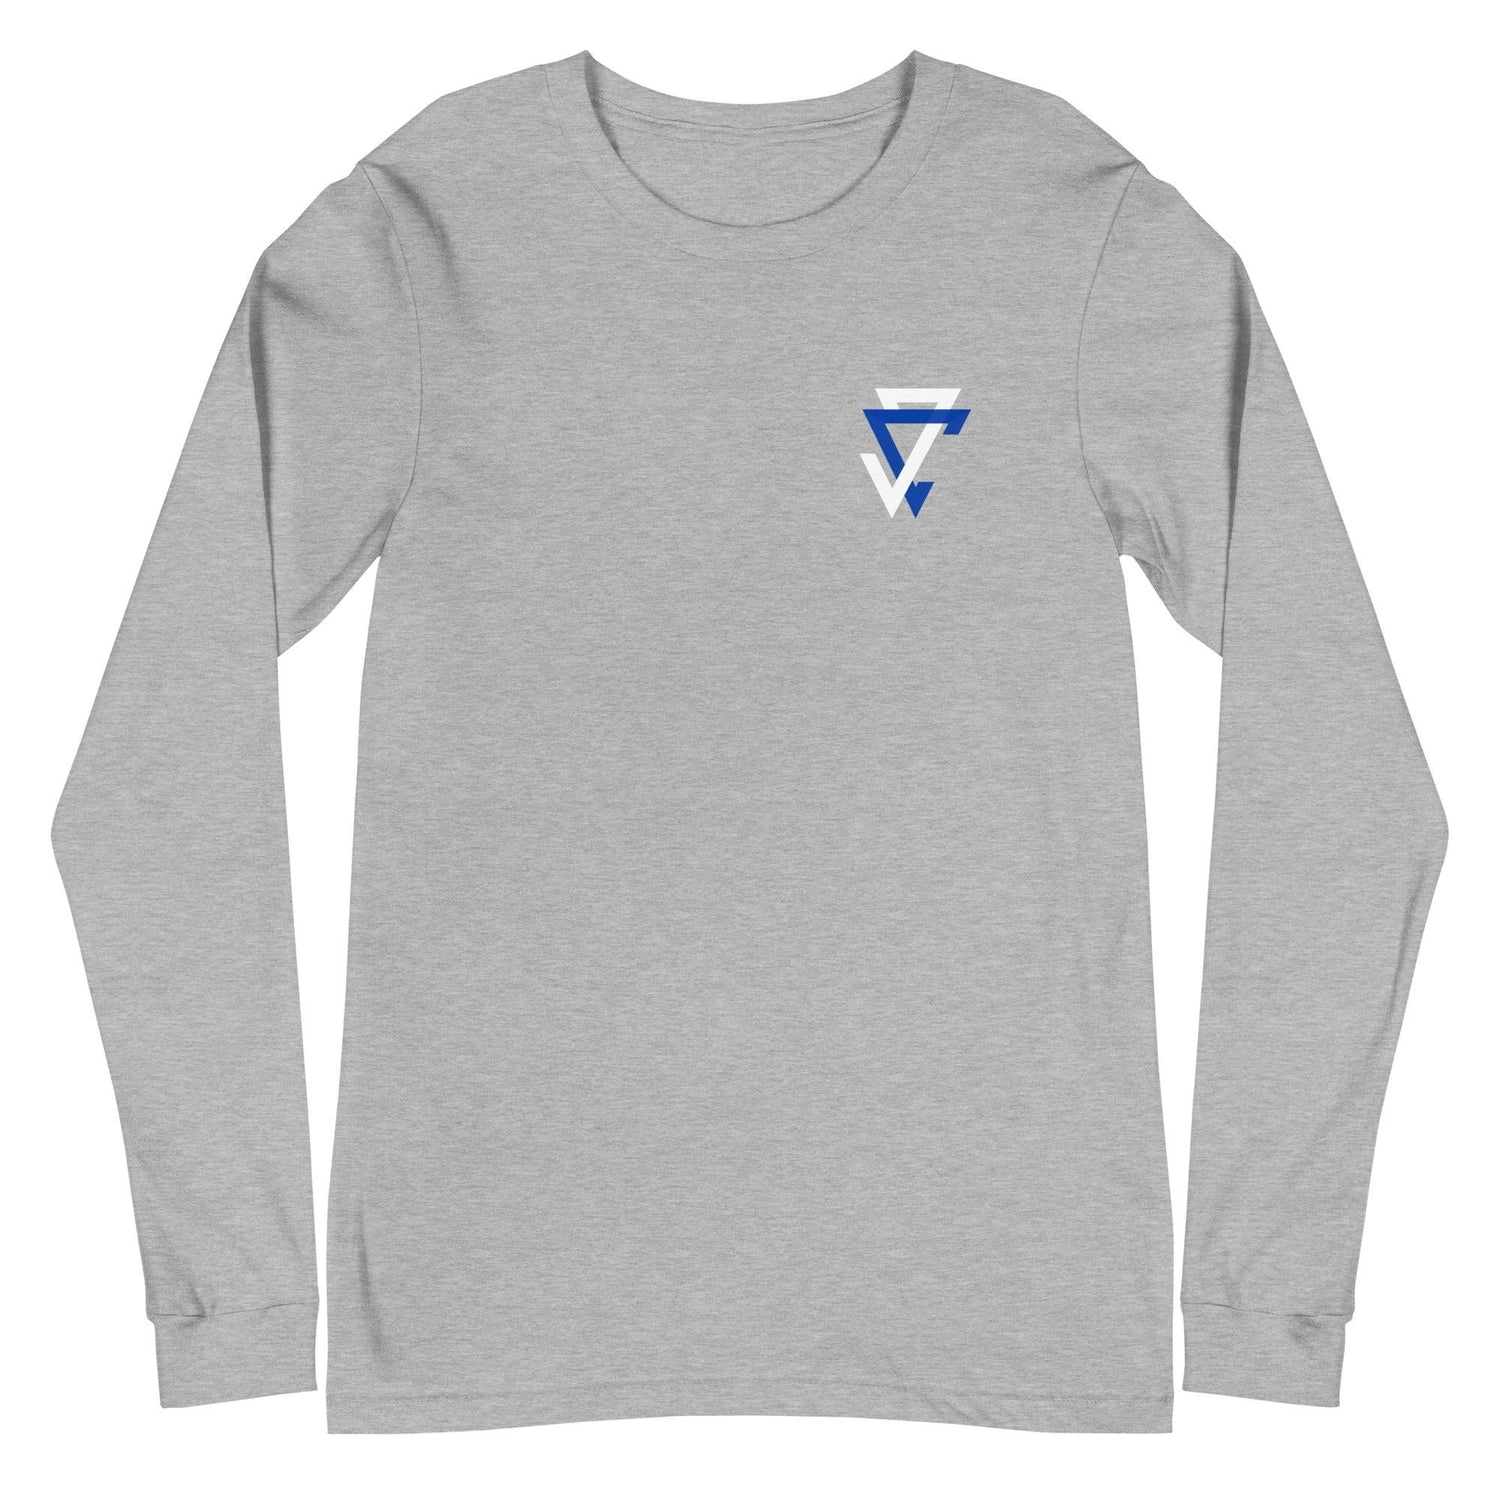 Jamall Clyce "Essential" Long Sleeve Tee - Fan Arch